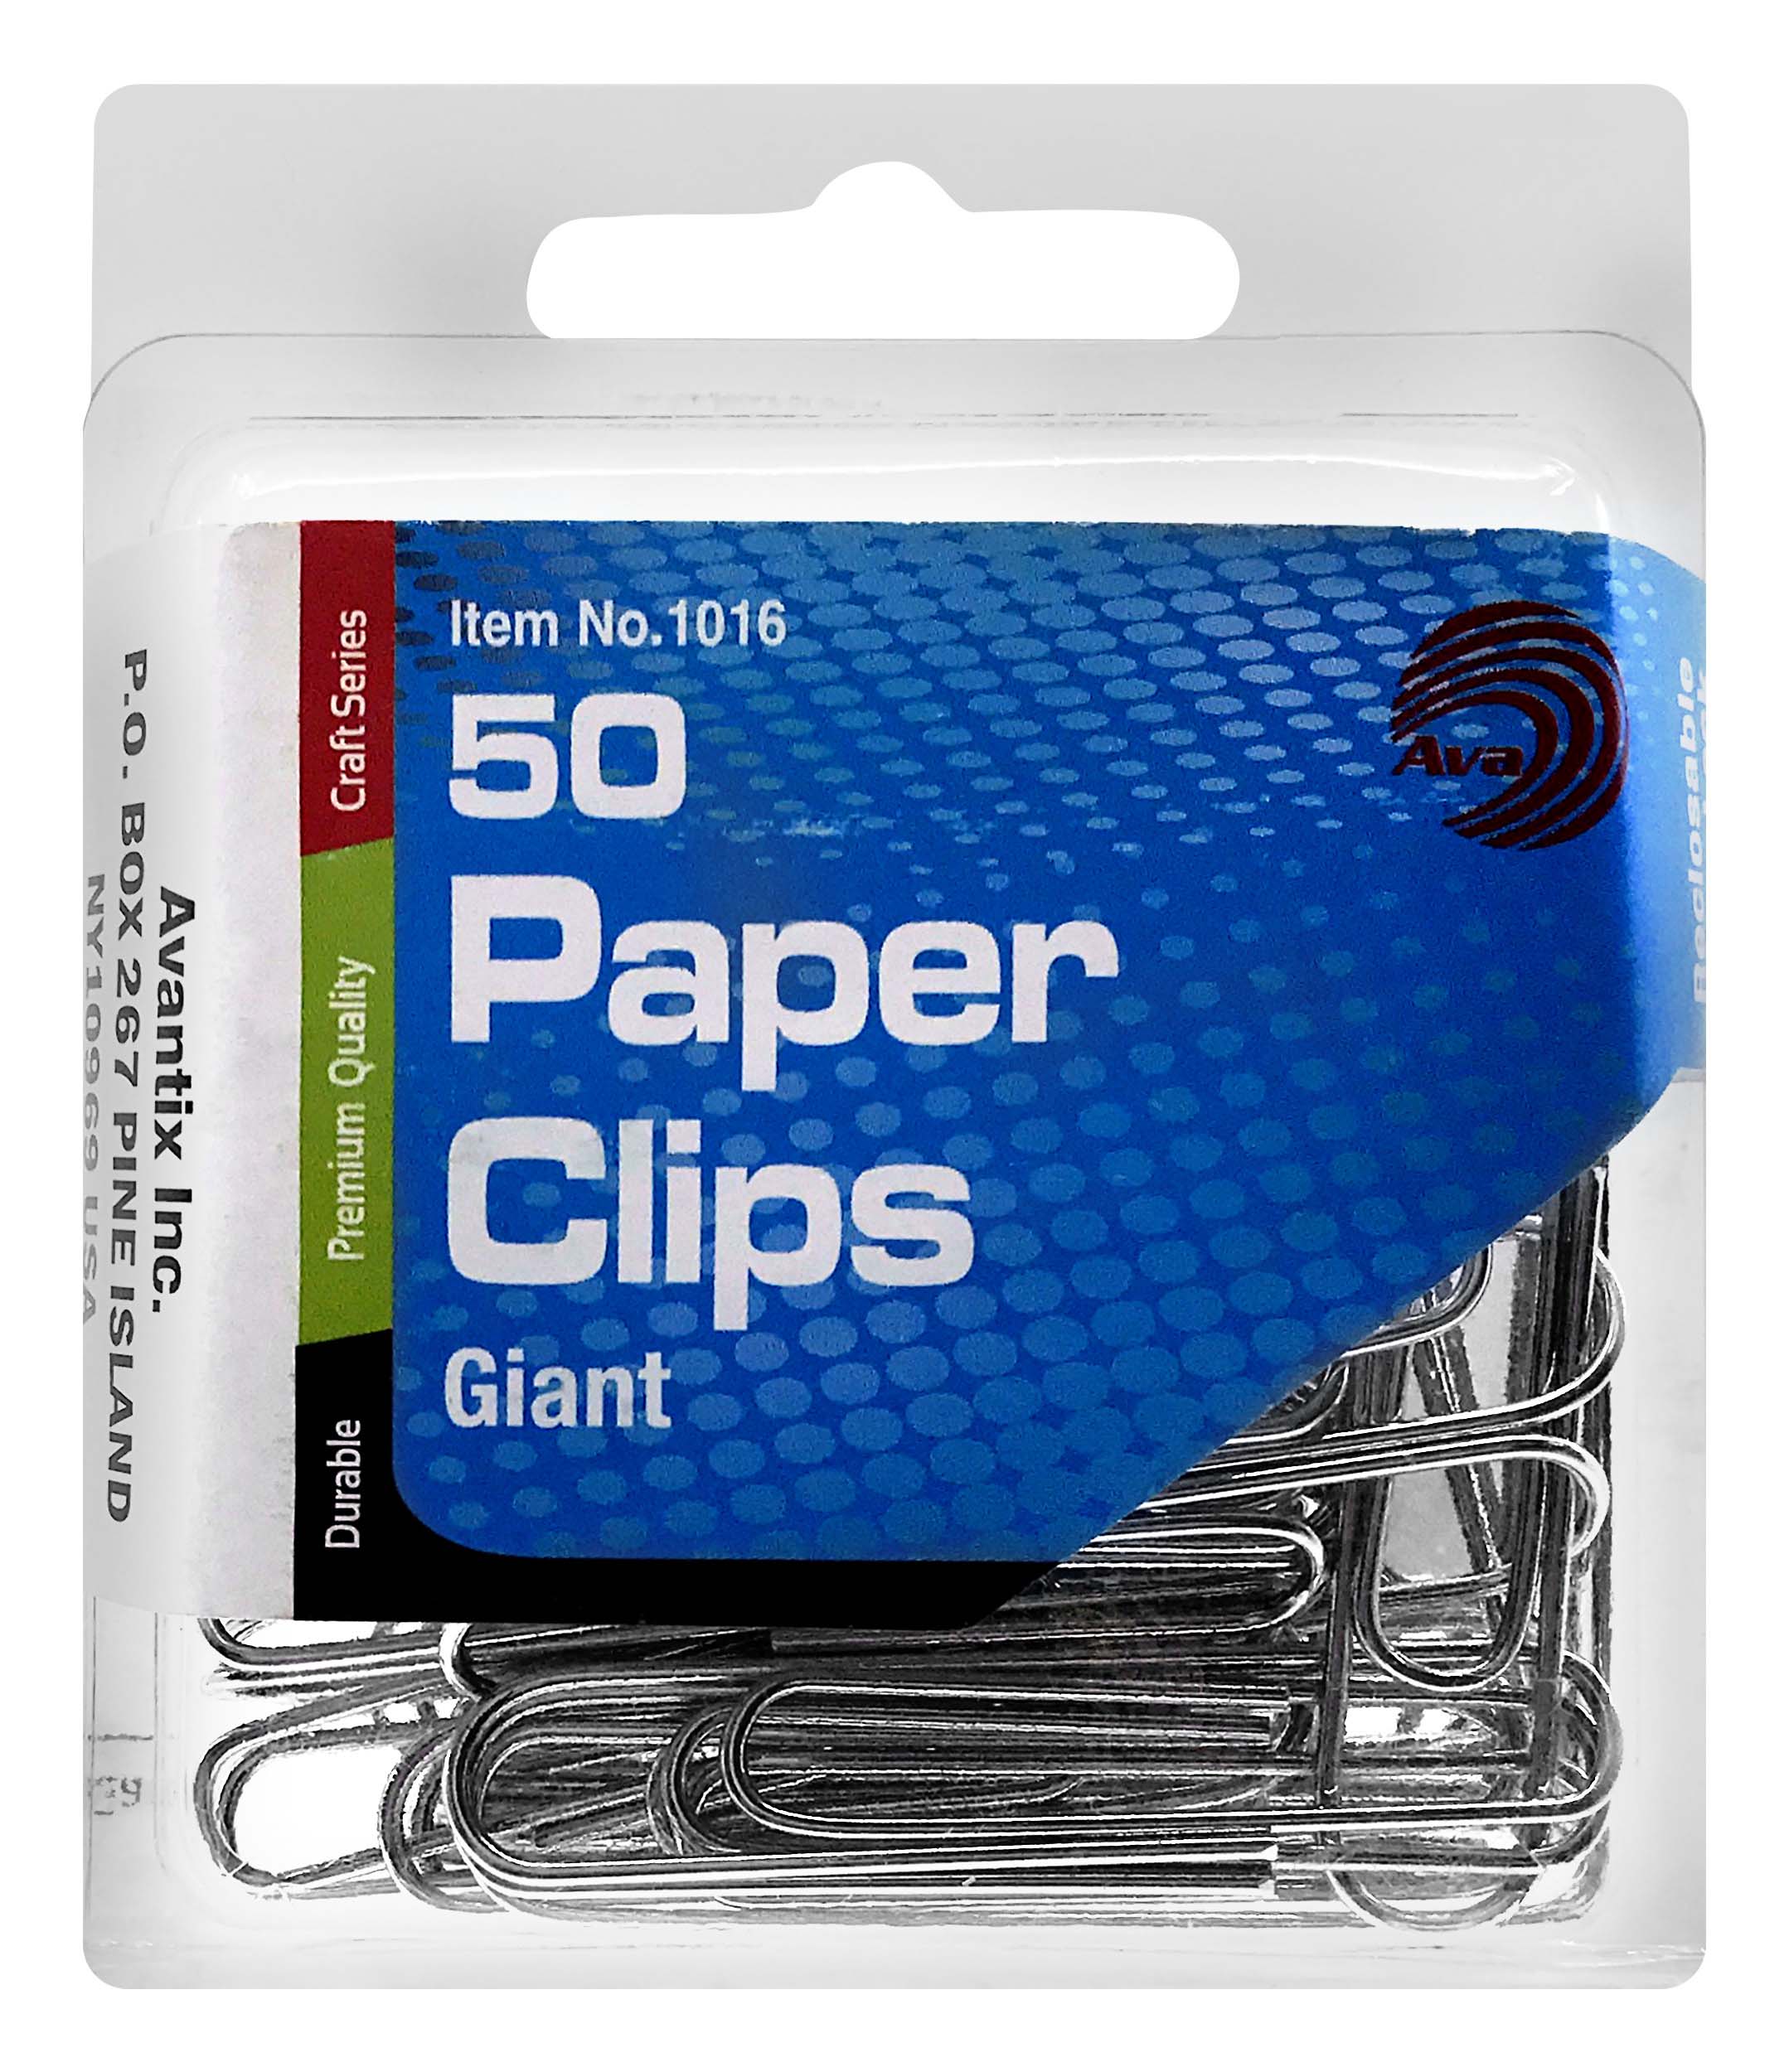 A&W Giant Paper Clips, 50 Count